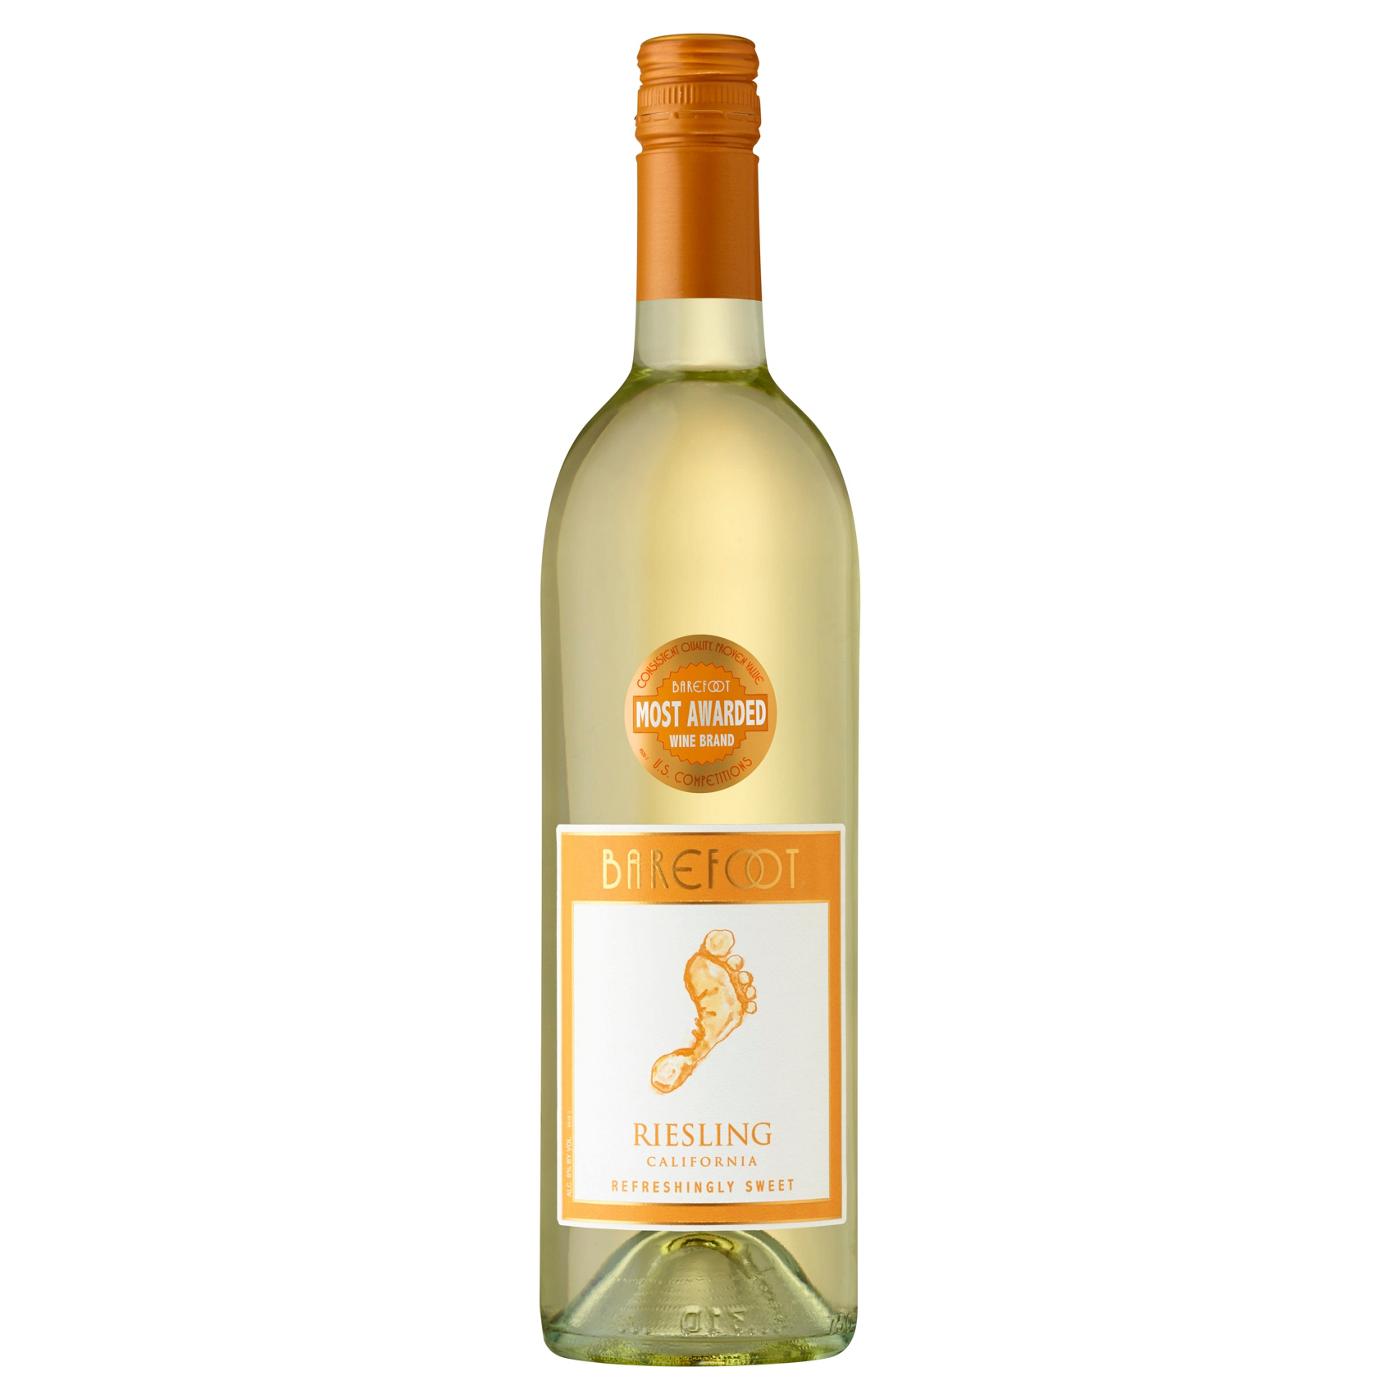 Barefoot Riesling White Wine; image 1 of 5